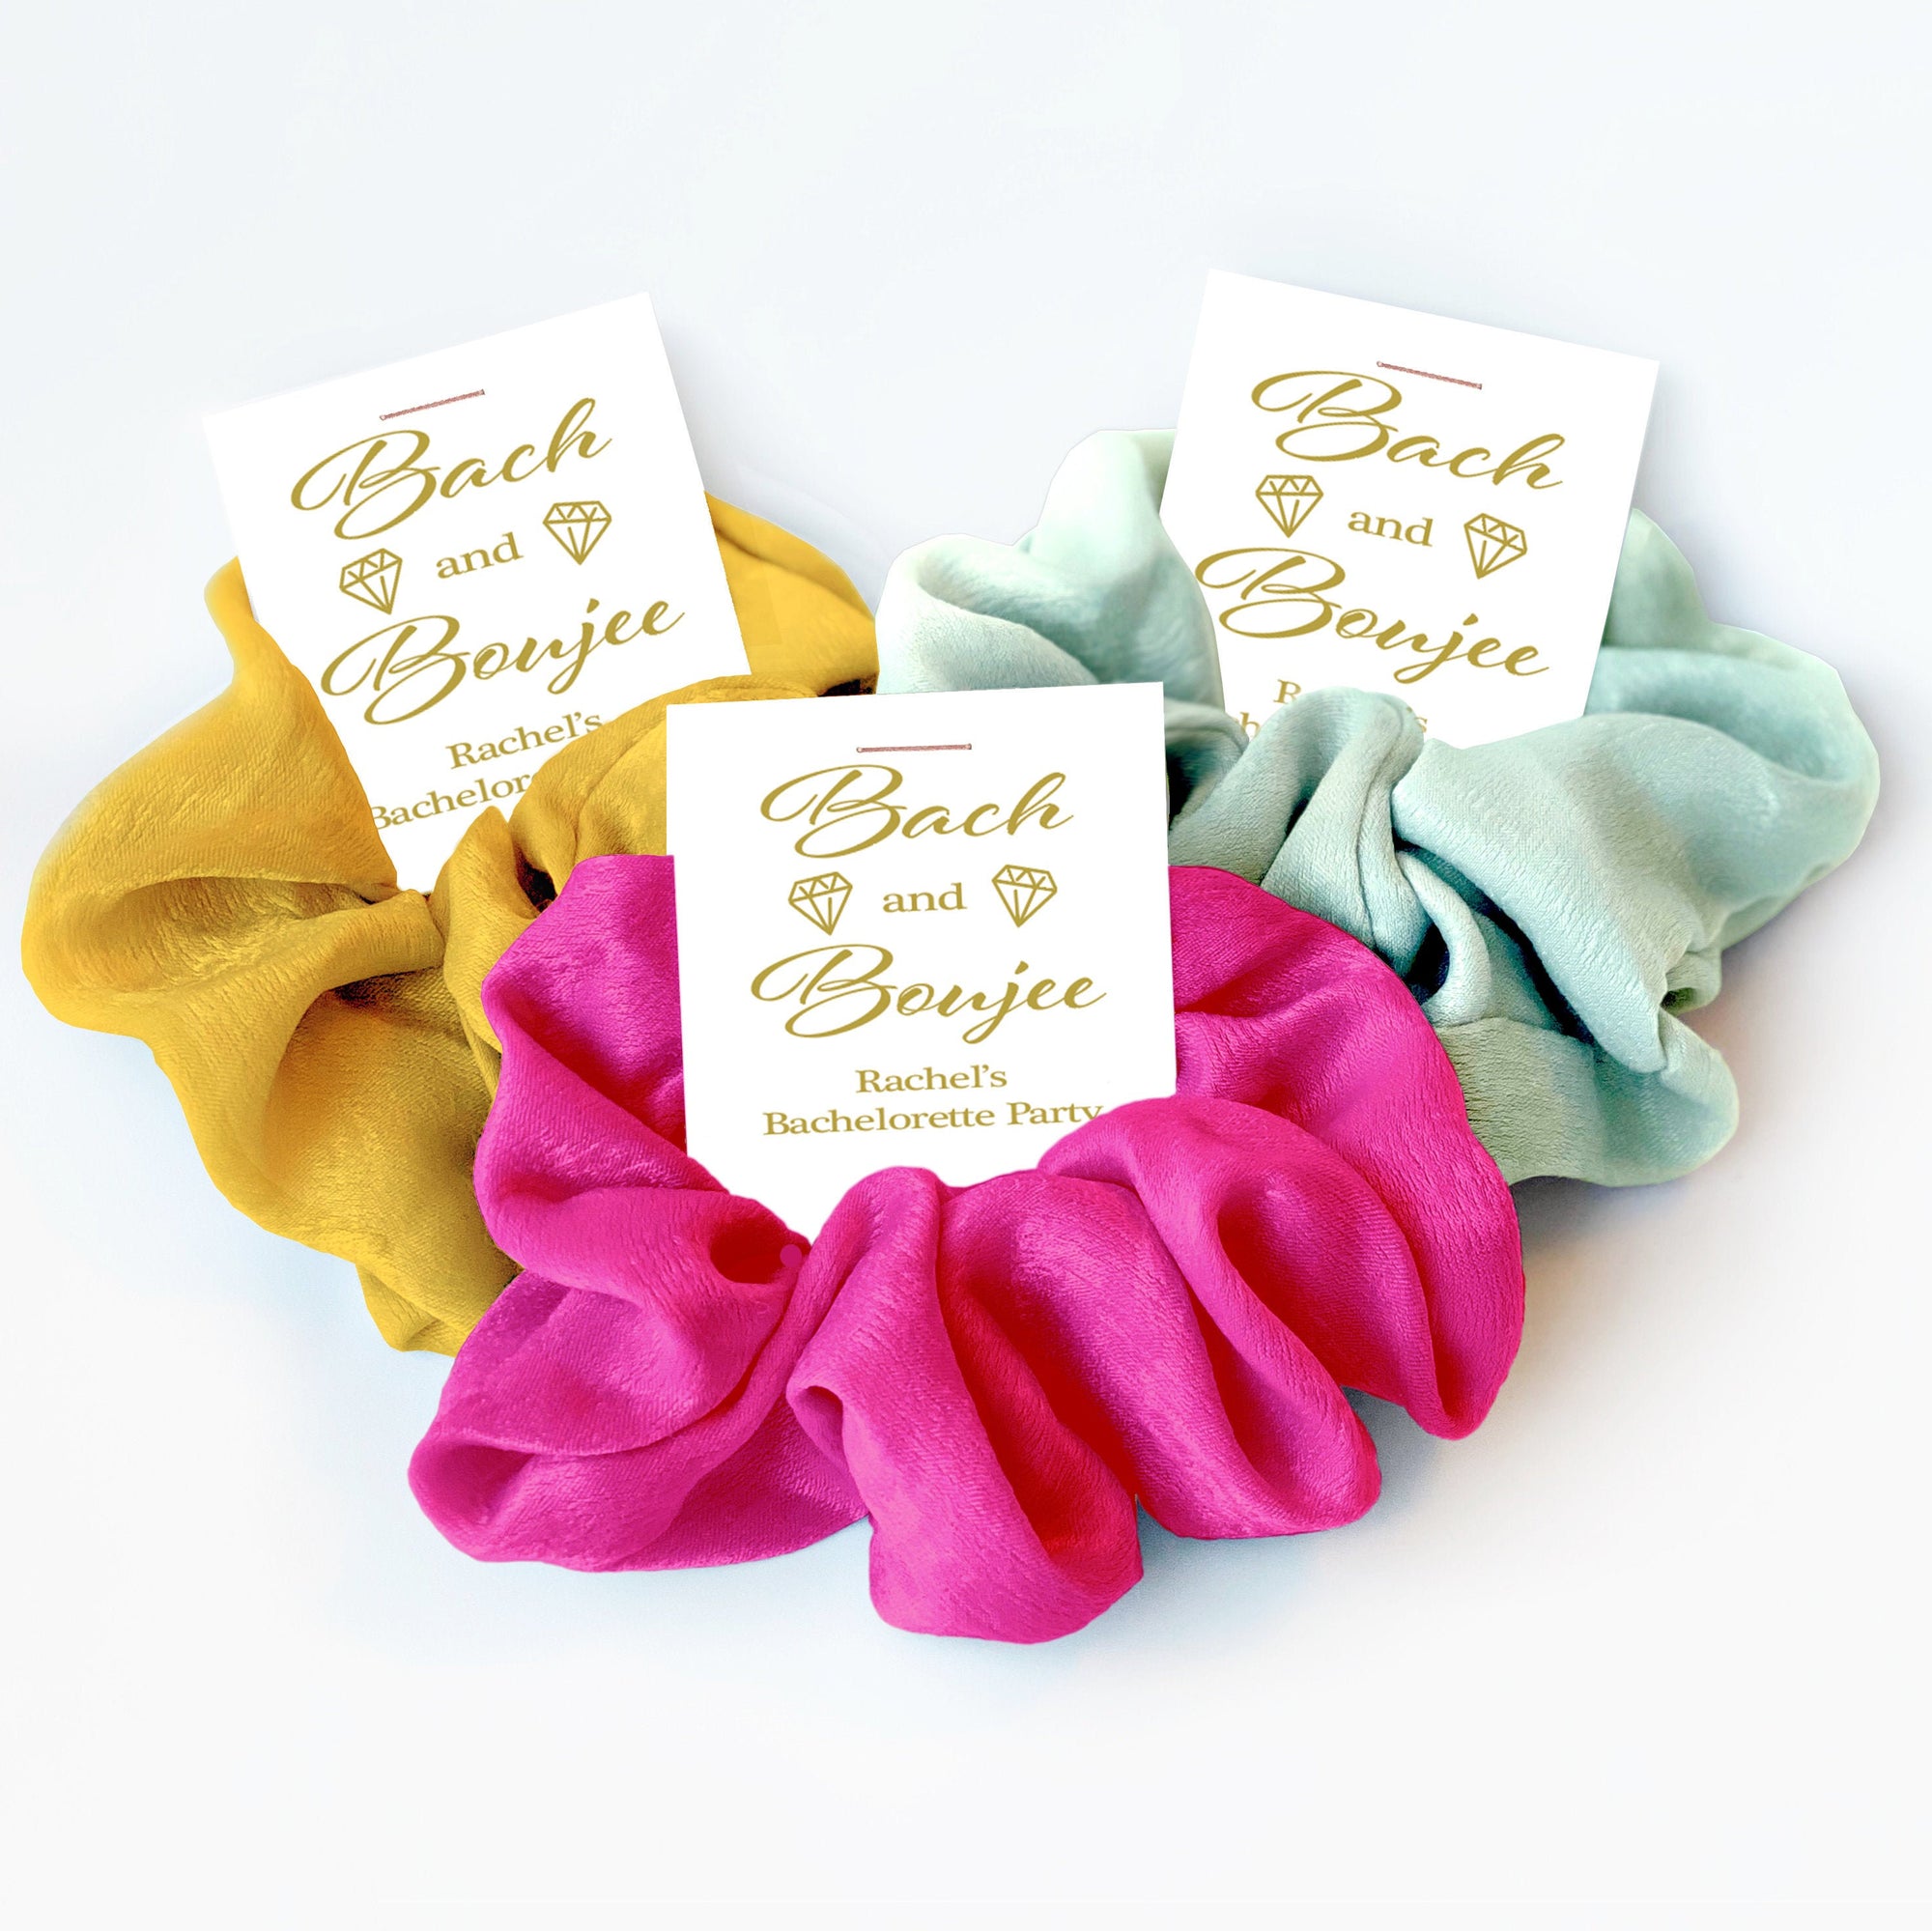 Bach and Boujee Bachelorette Party Favors, Hair Scrunchie Favors, Bride and Boujee, Bach and Boujee Party Favors